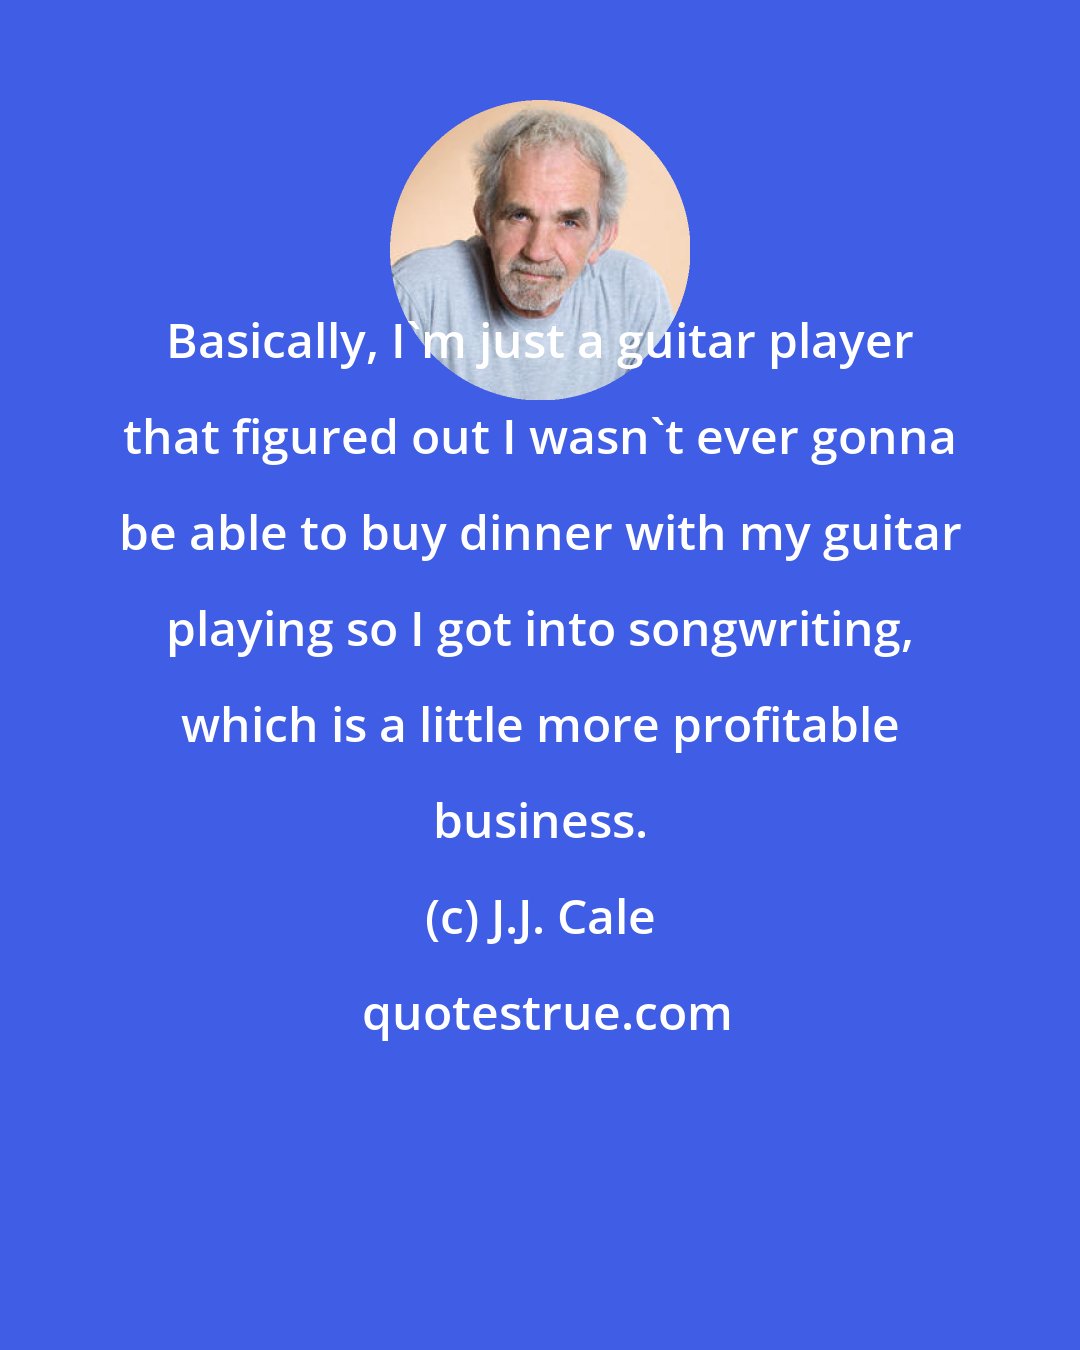 J.J. Cale: Basically, I'm just a guitar player that figured out I wasn't ever gonna be able to buy dinner with my guitar playing so I got into songwriting, which is a little more profitable business.